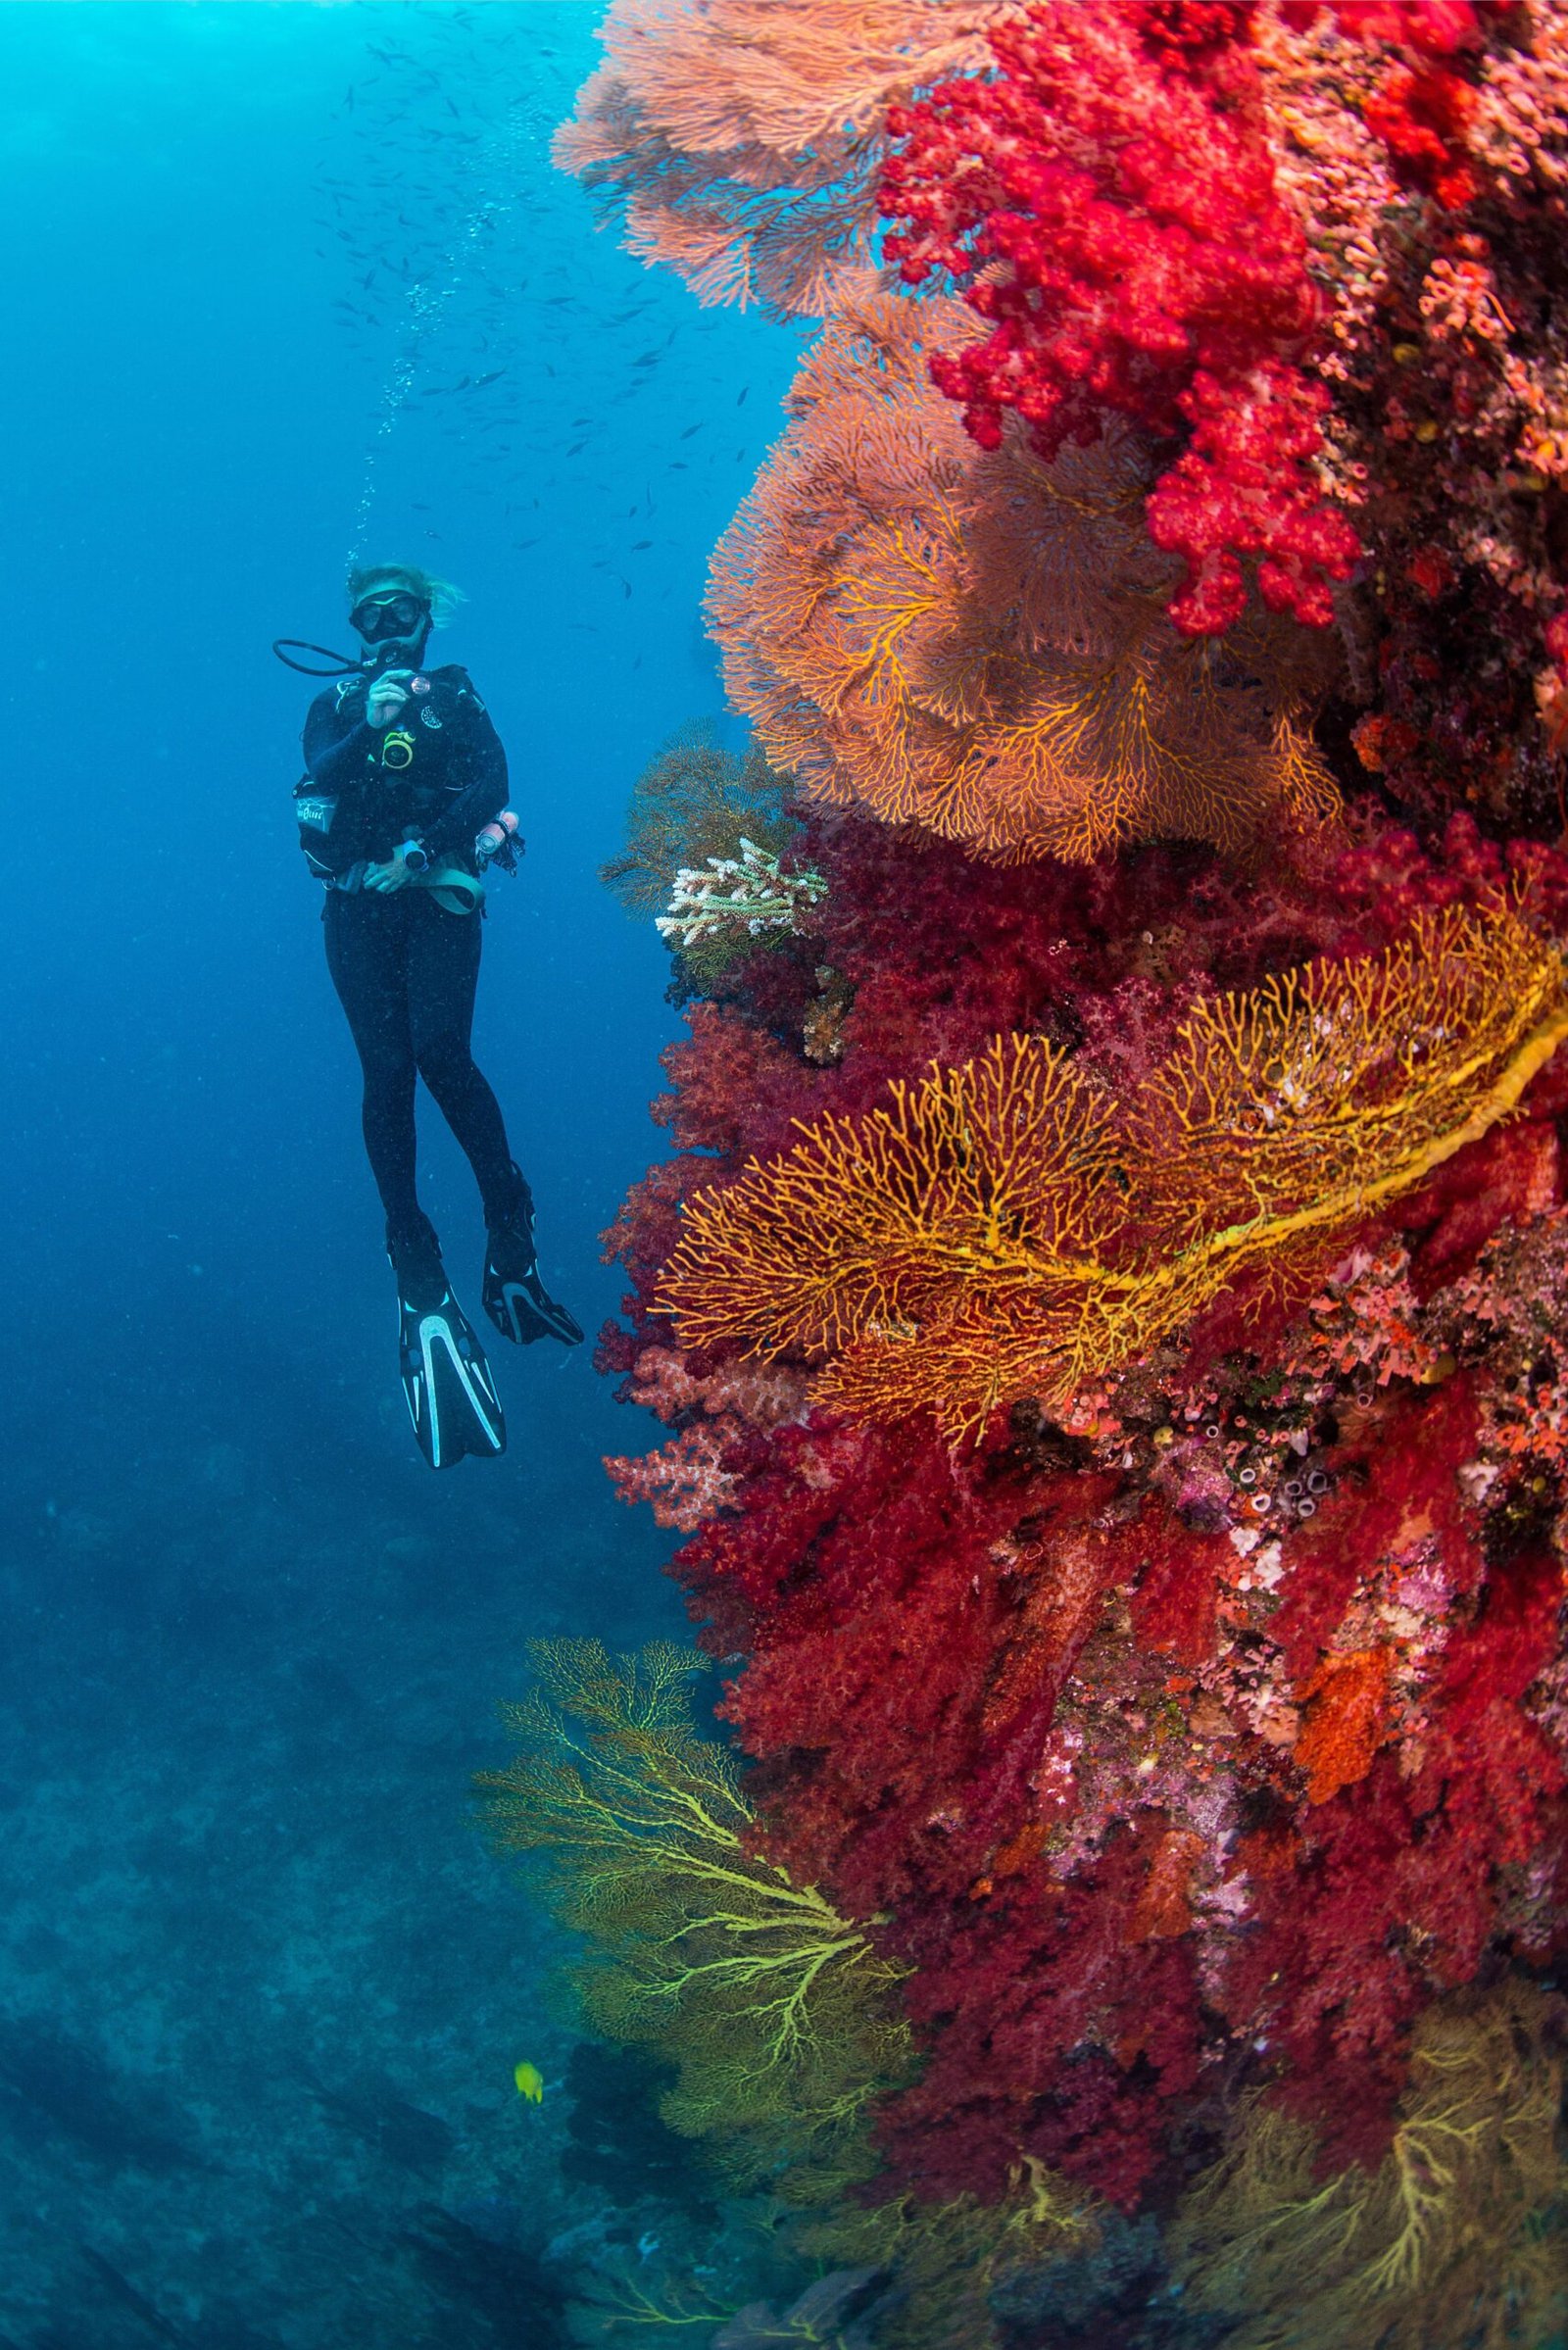 Diver and Soft Coral; photo credit: Tourism Fiji